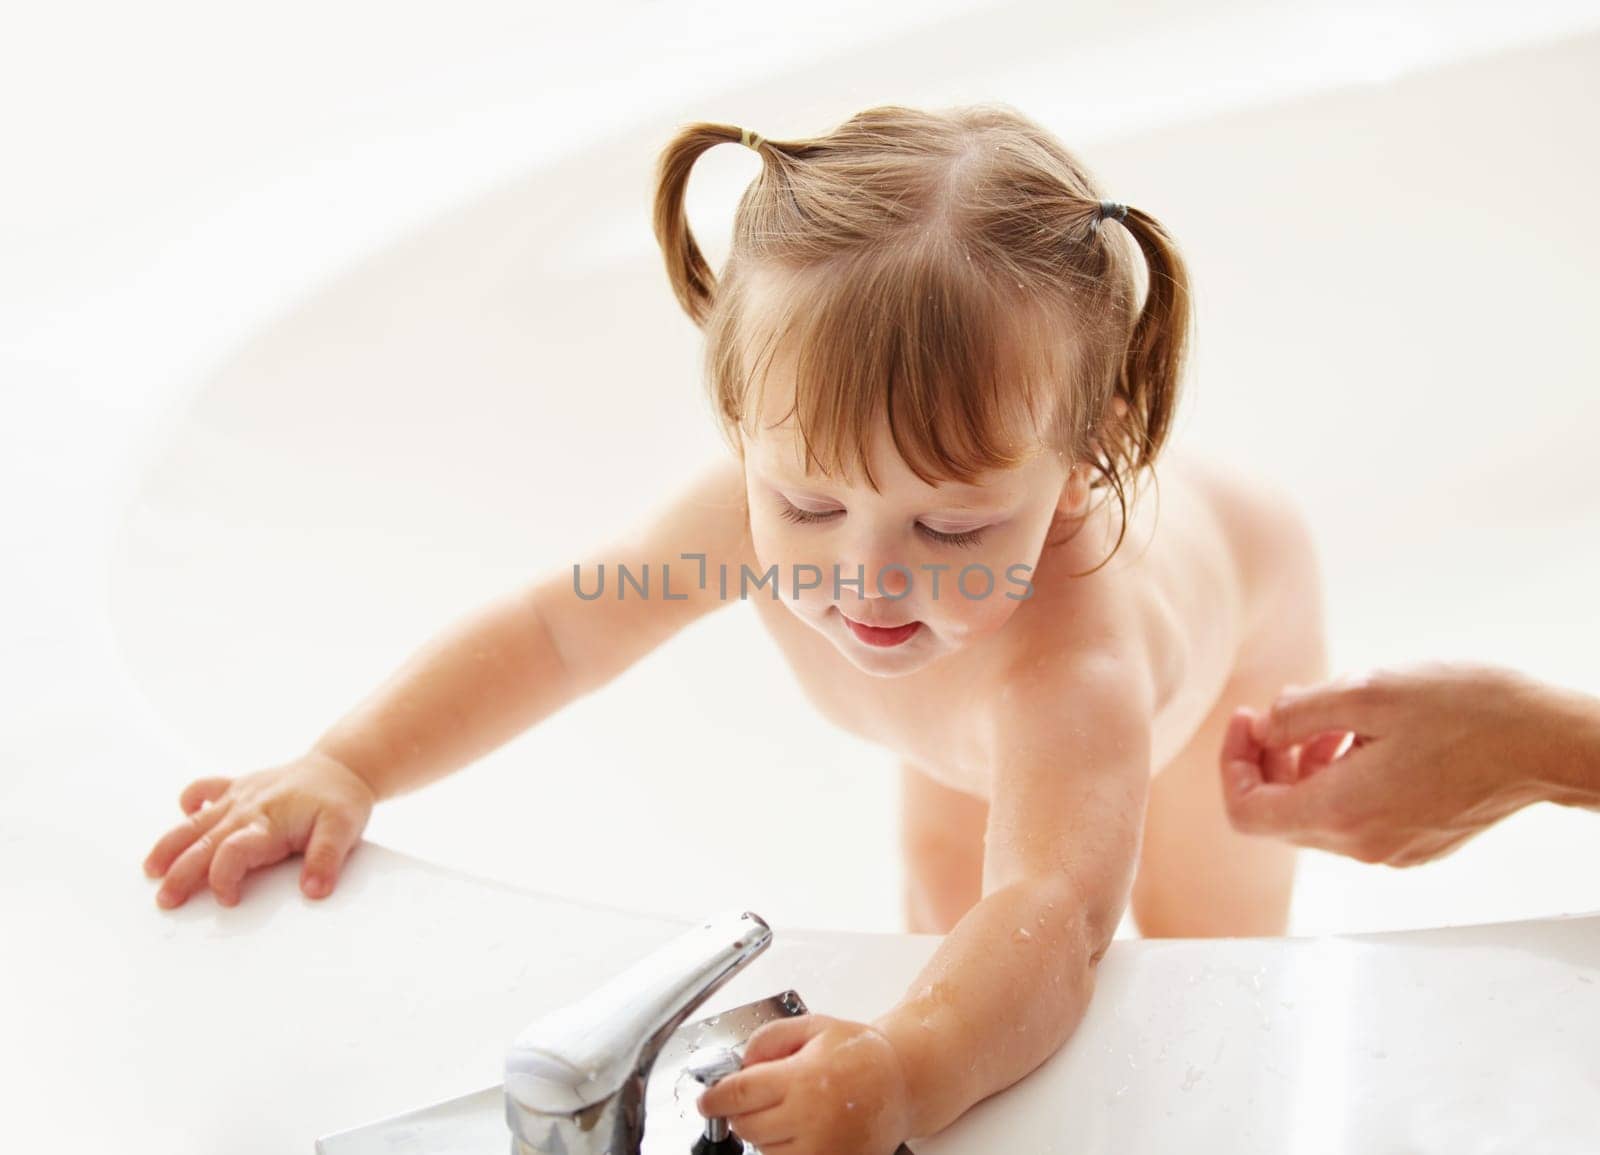 Kids, cleaning and water with a baby in the bath for natural skincare, development or hygiene. Children, bathroom and a curious young toddler girl in a bathtub for health and wellness in her home by YuriArcurs